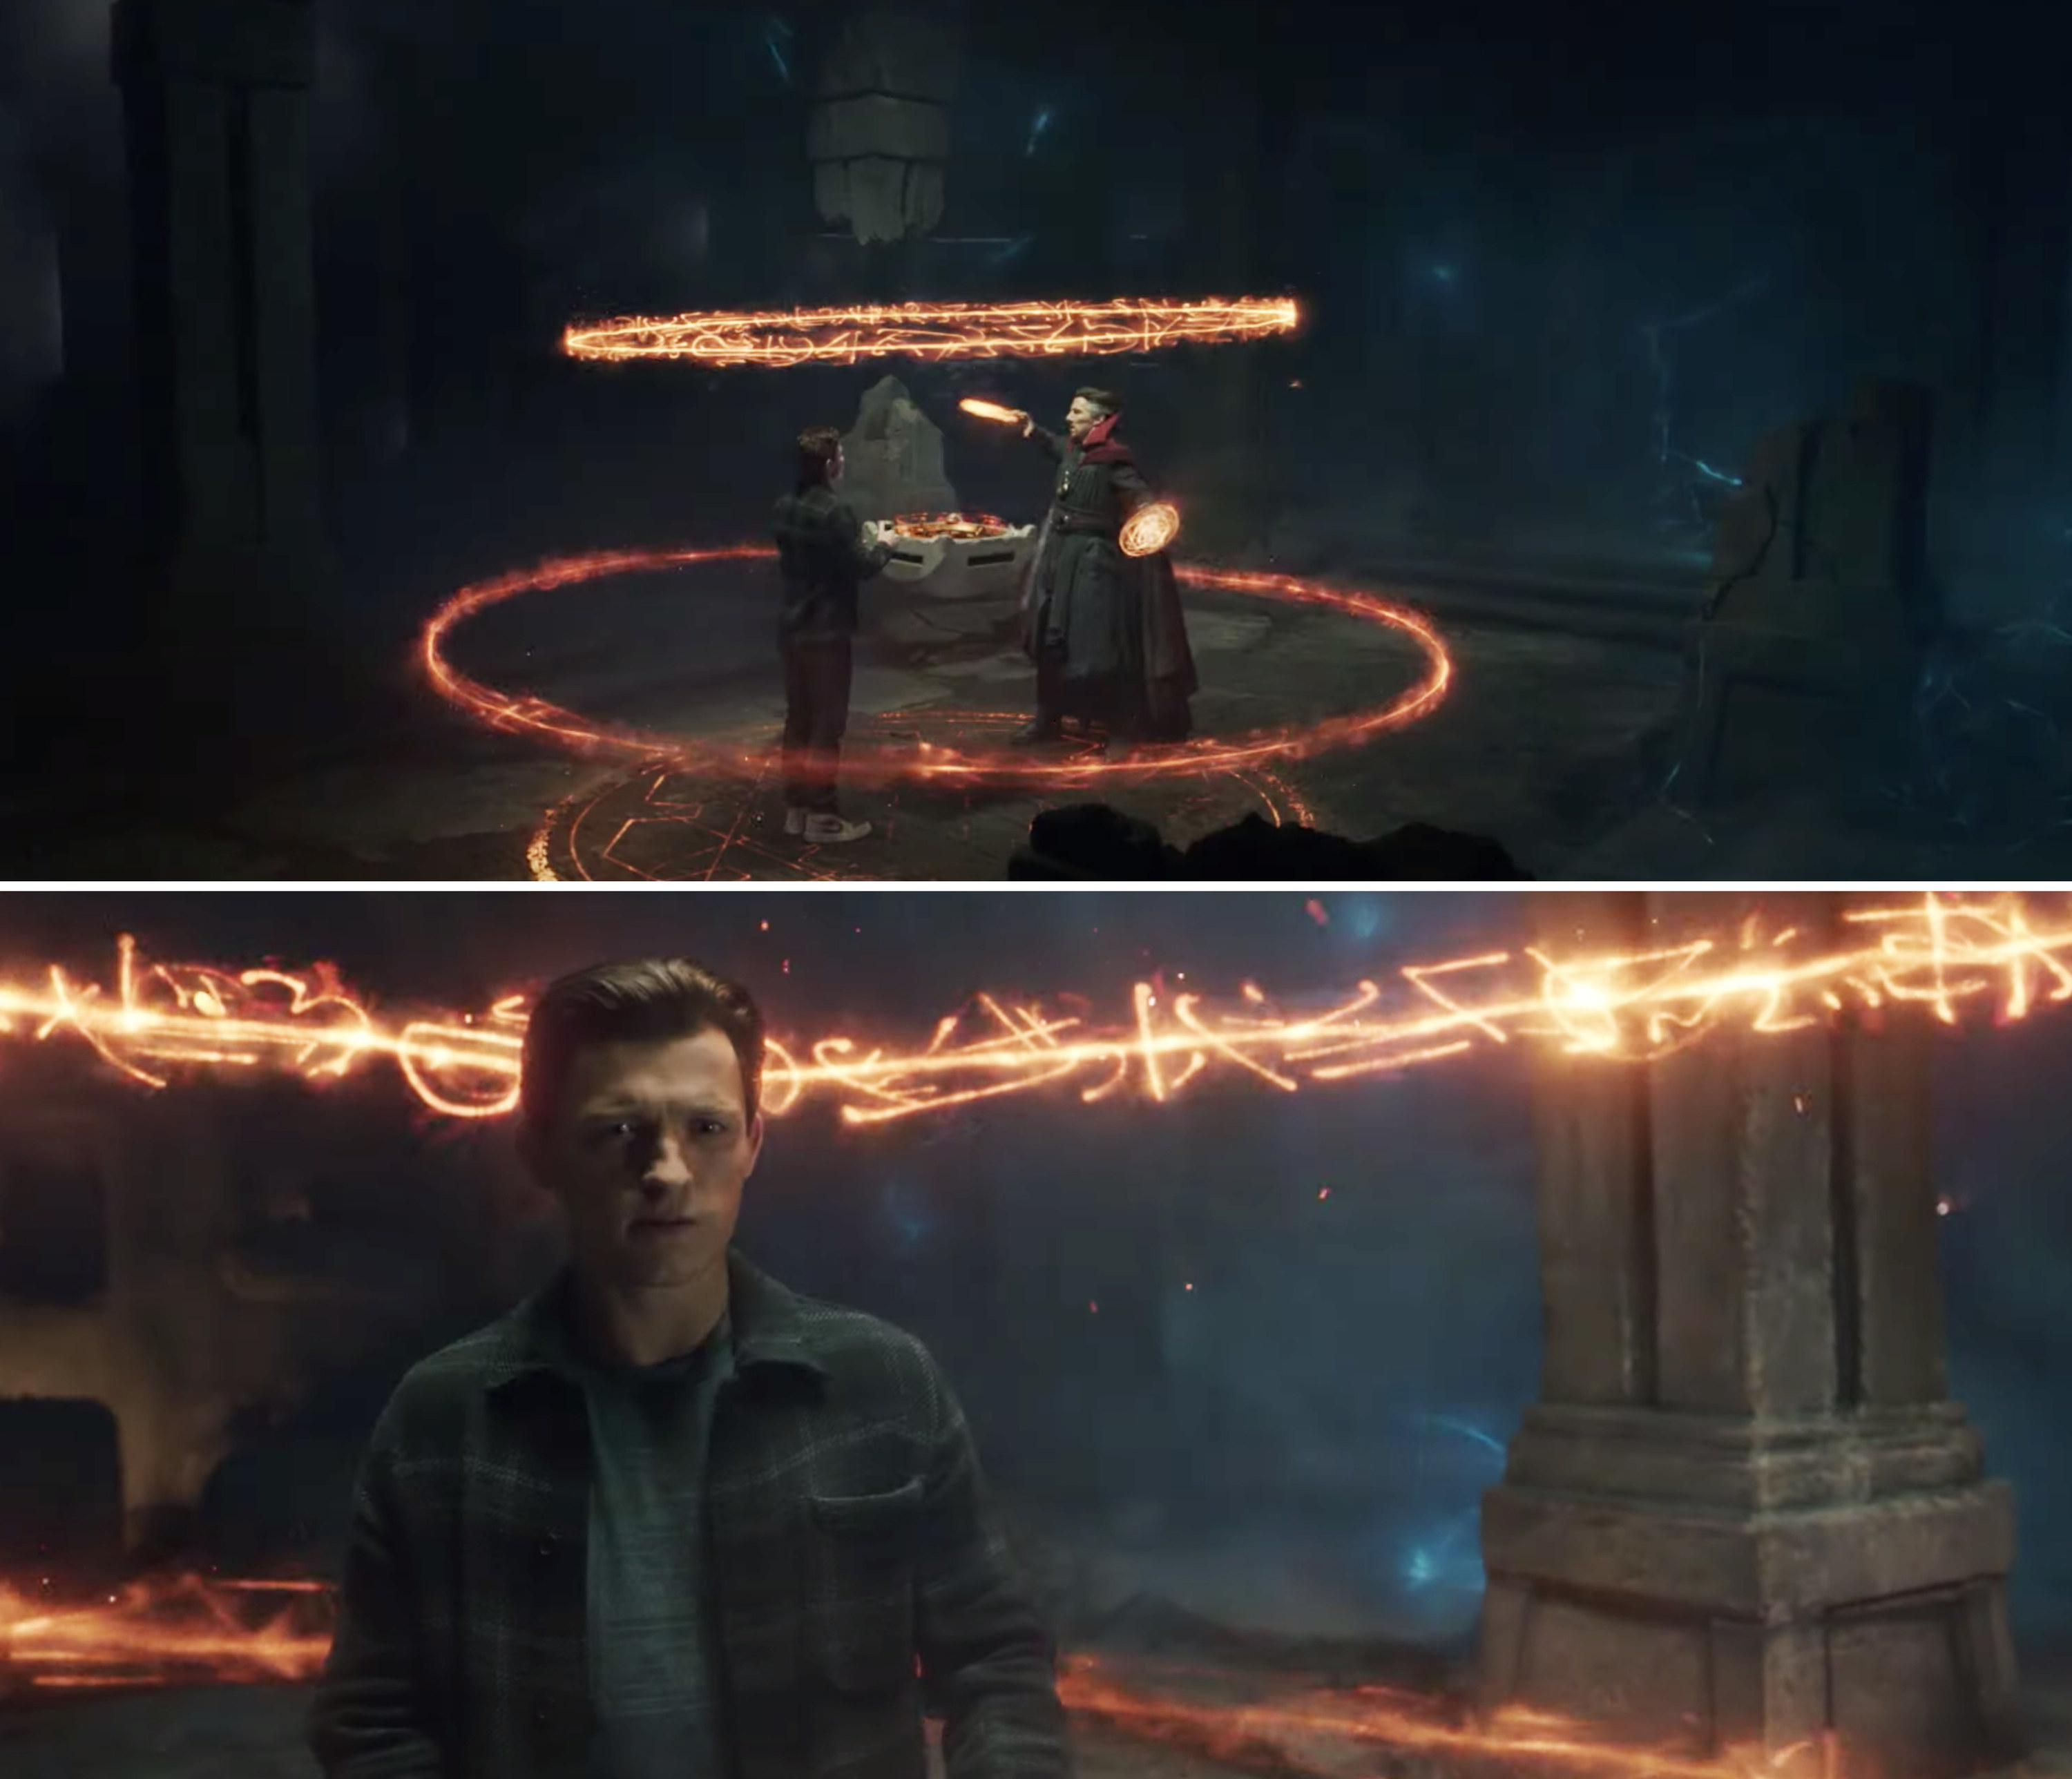 Doctor Strange and Peter doing magic